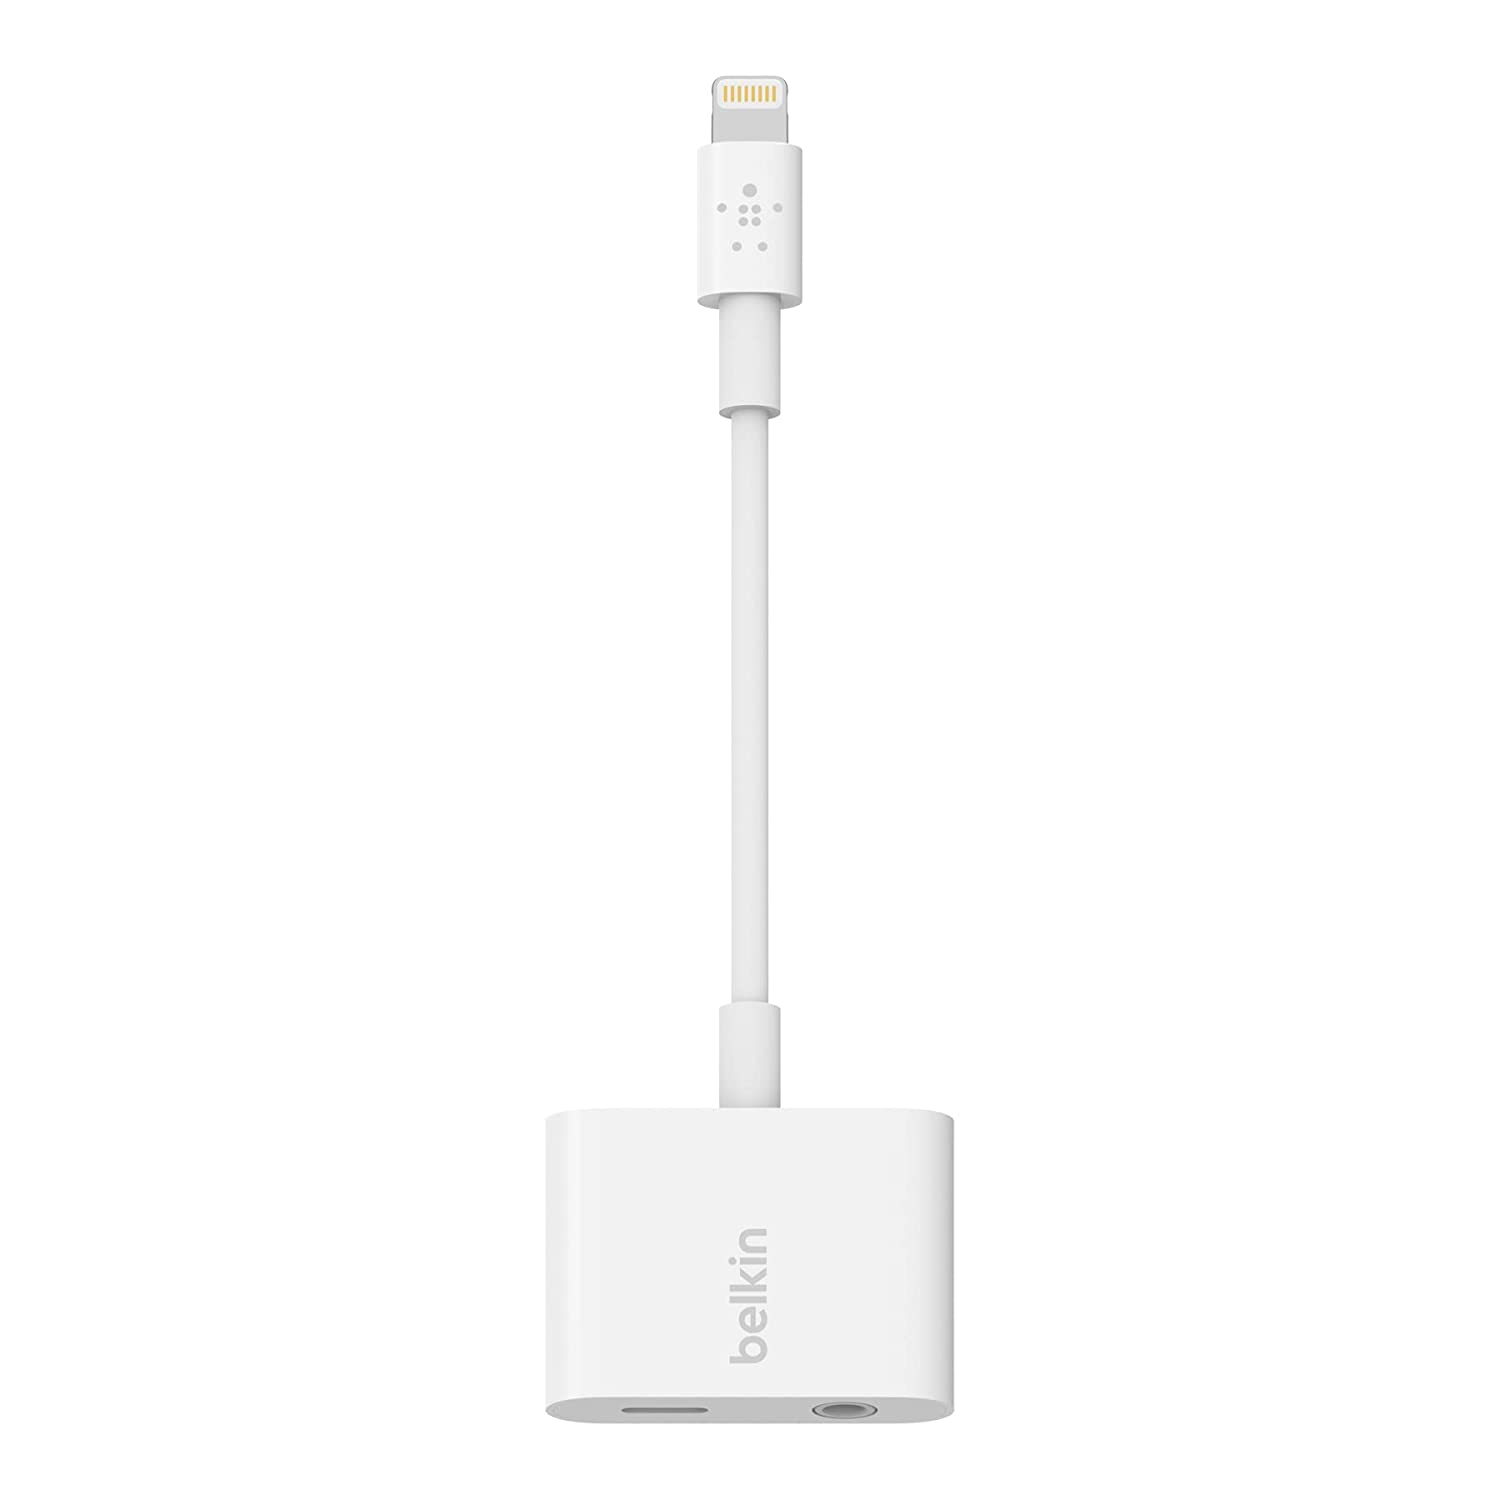 Belkin 3.5 mm Audio + Charge Adpter - White